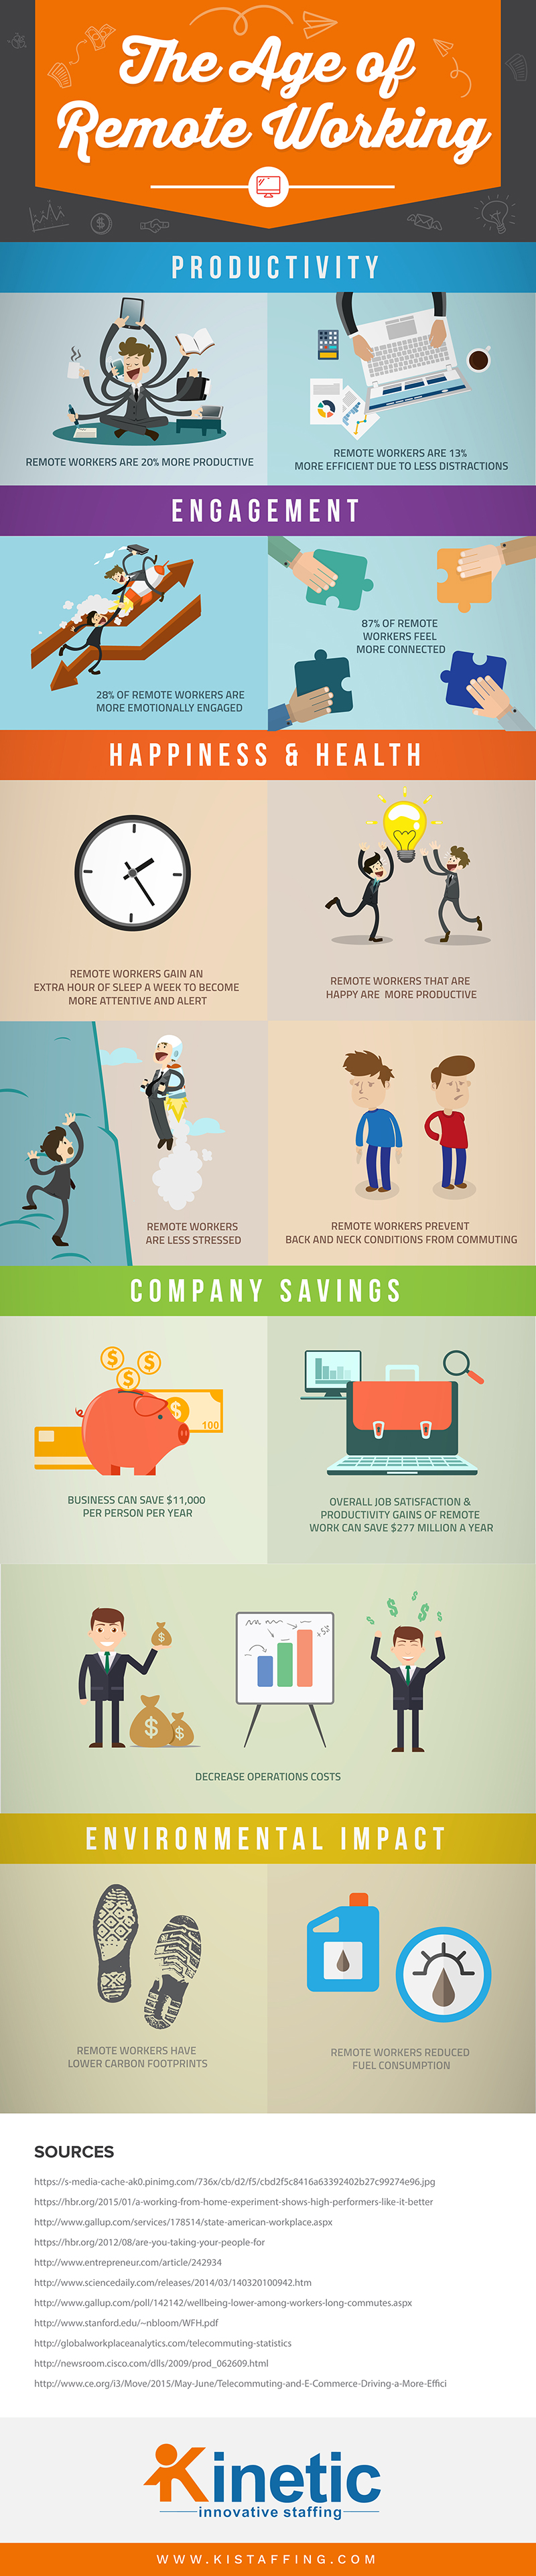 Infographic about employing remote workers